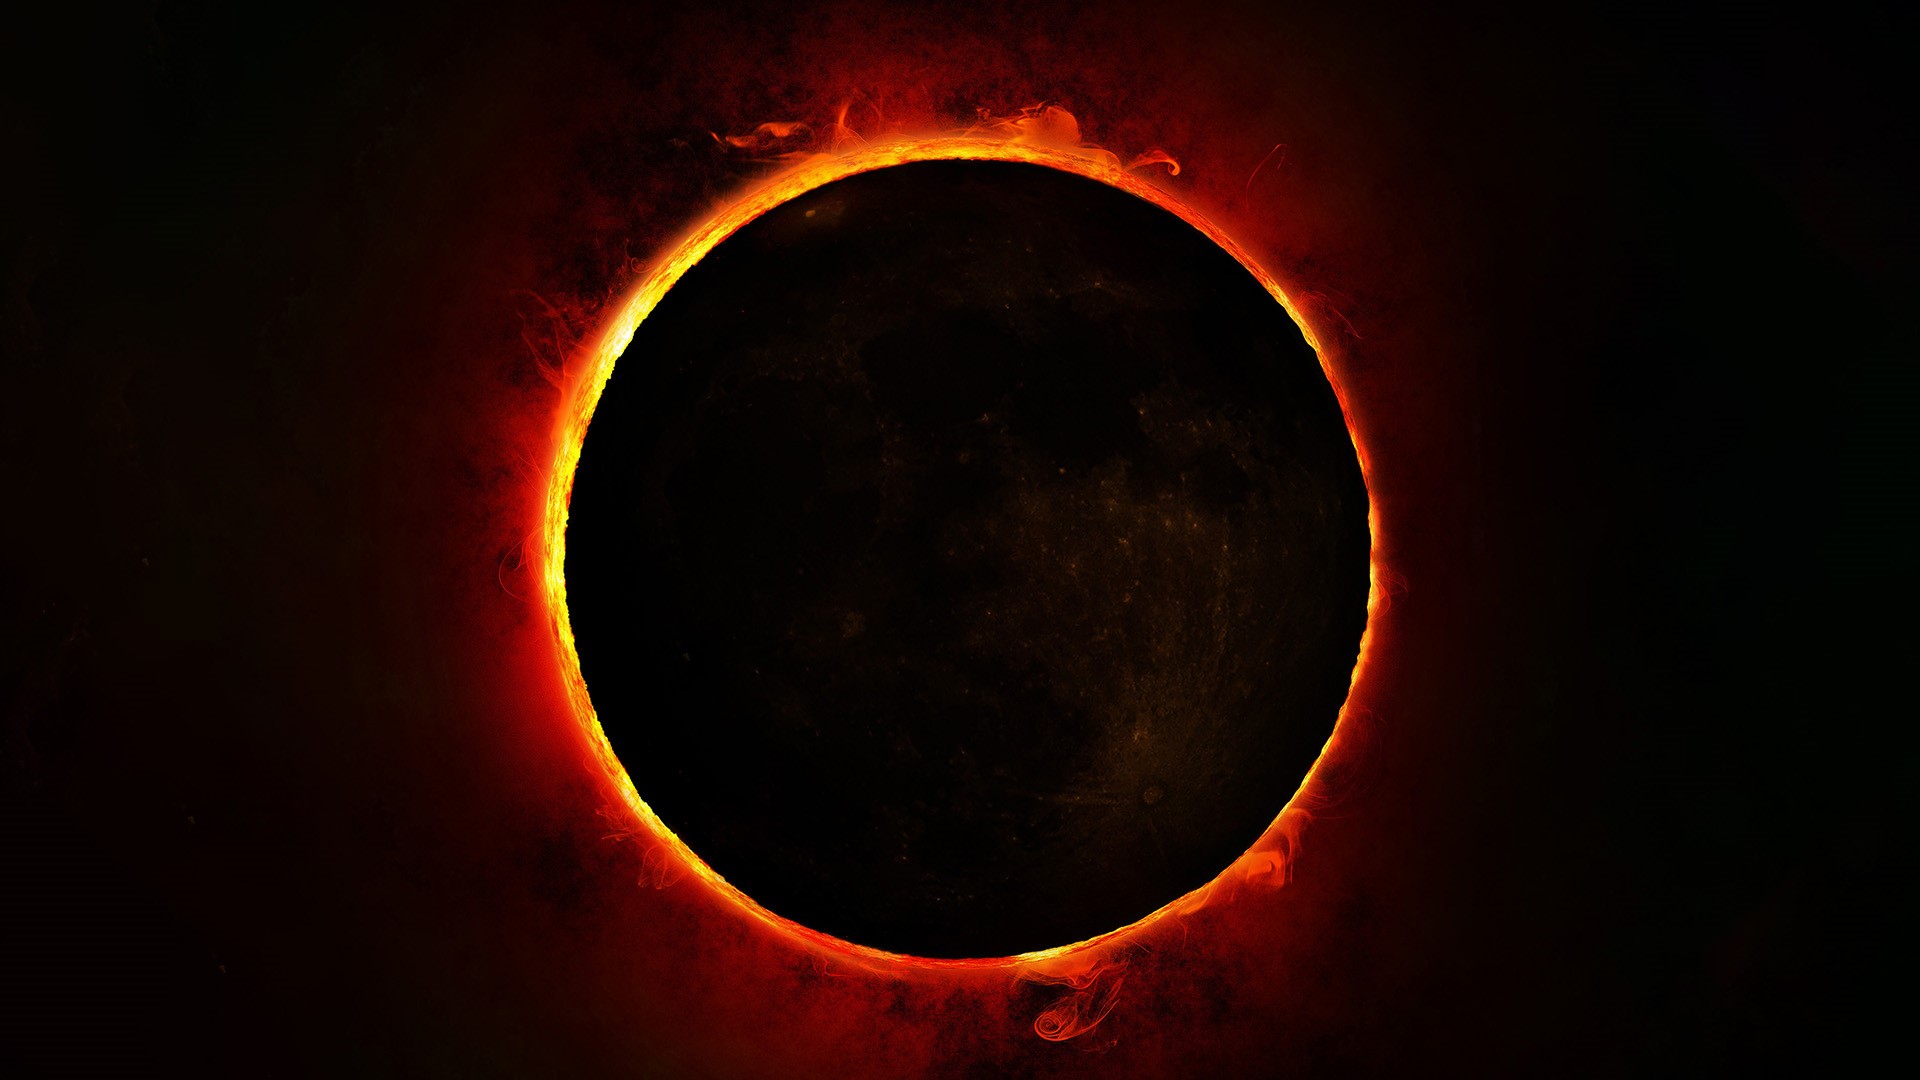 Image showing a solar eclipse